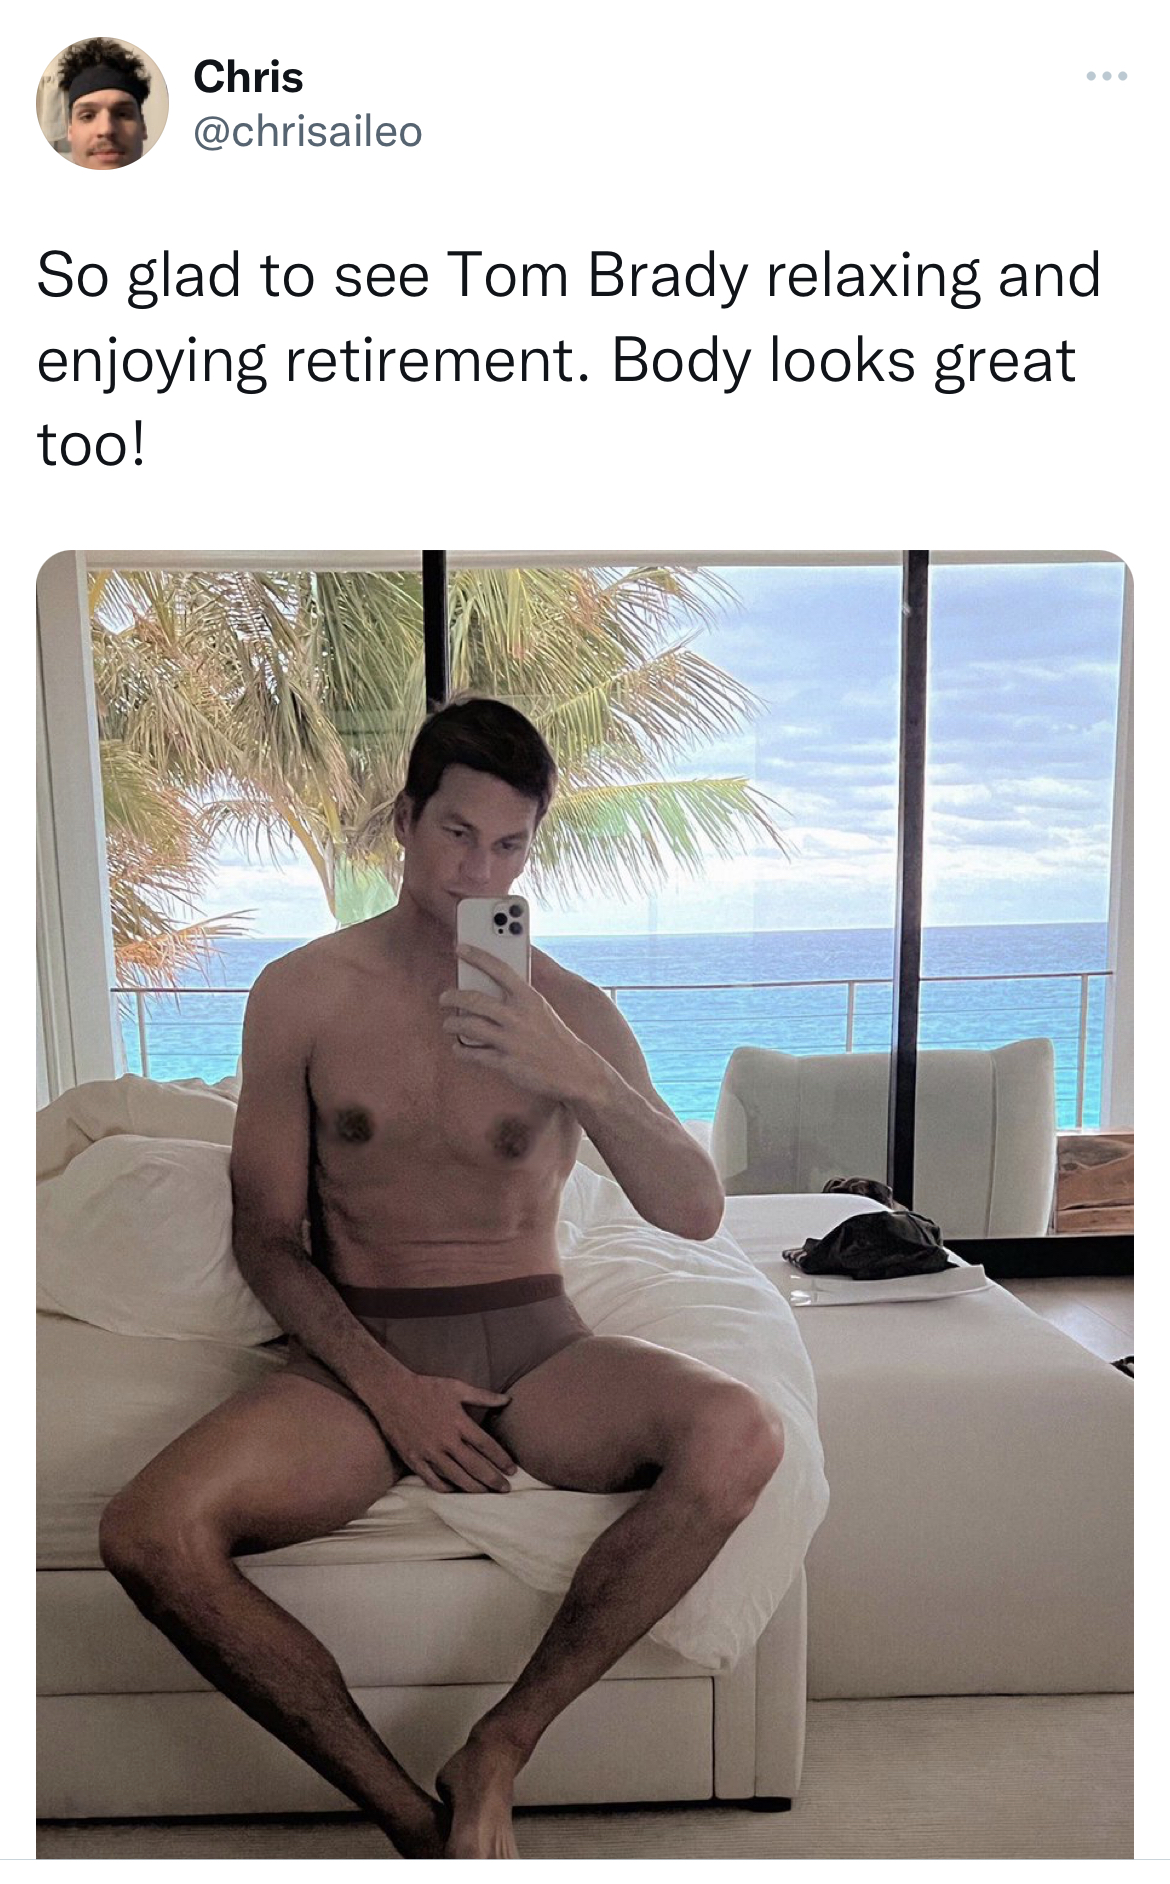 Untamed Tweets - male - Chris So glad to see Tom Brady relaxing and enjoying retirement. Body looks great too!